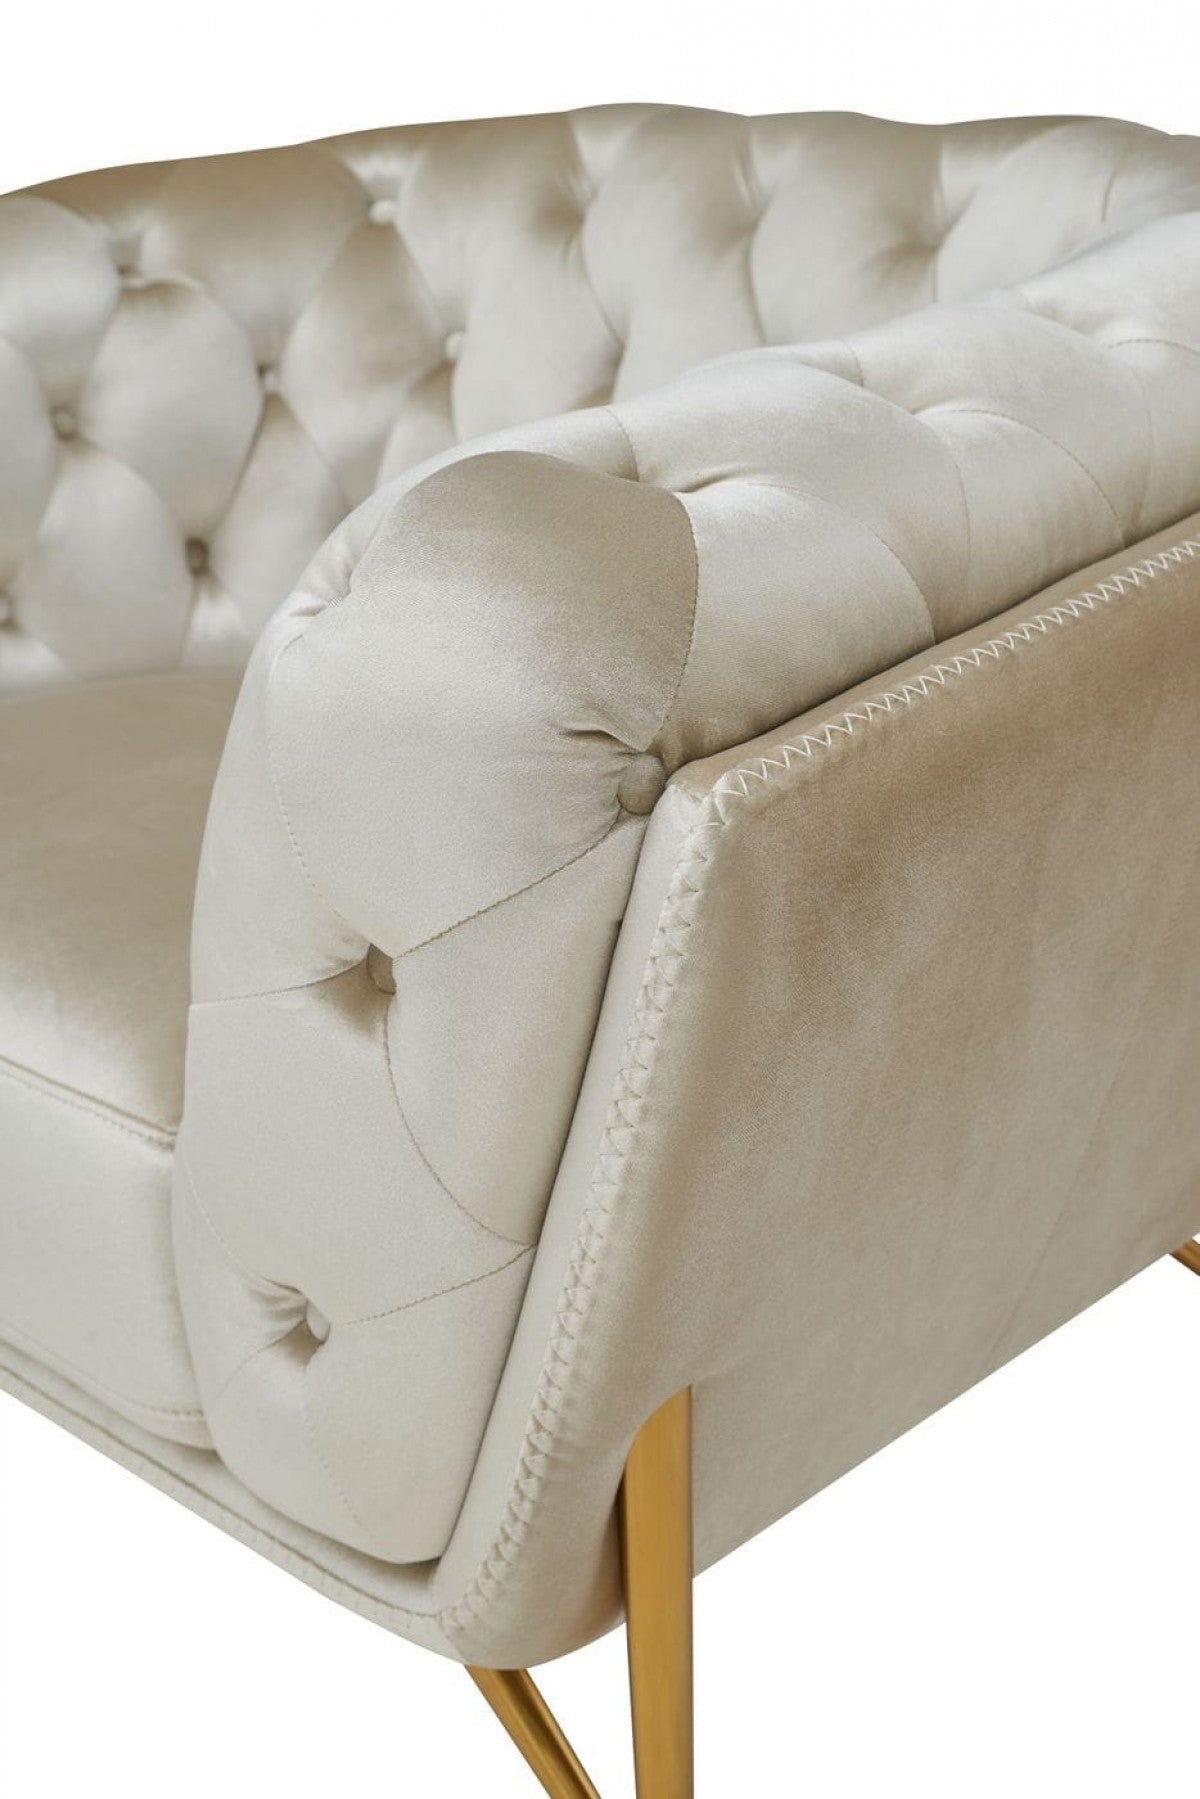 69" Pearl Tufted Velvet And Gold Chesterfield Love Seat